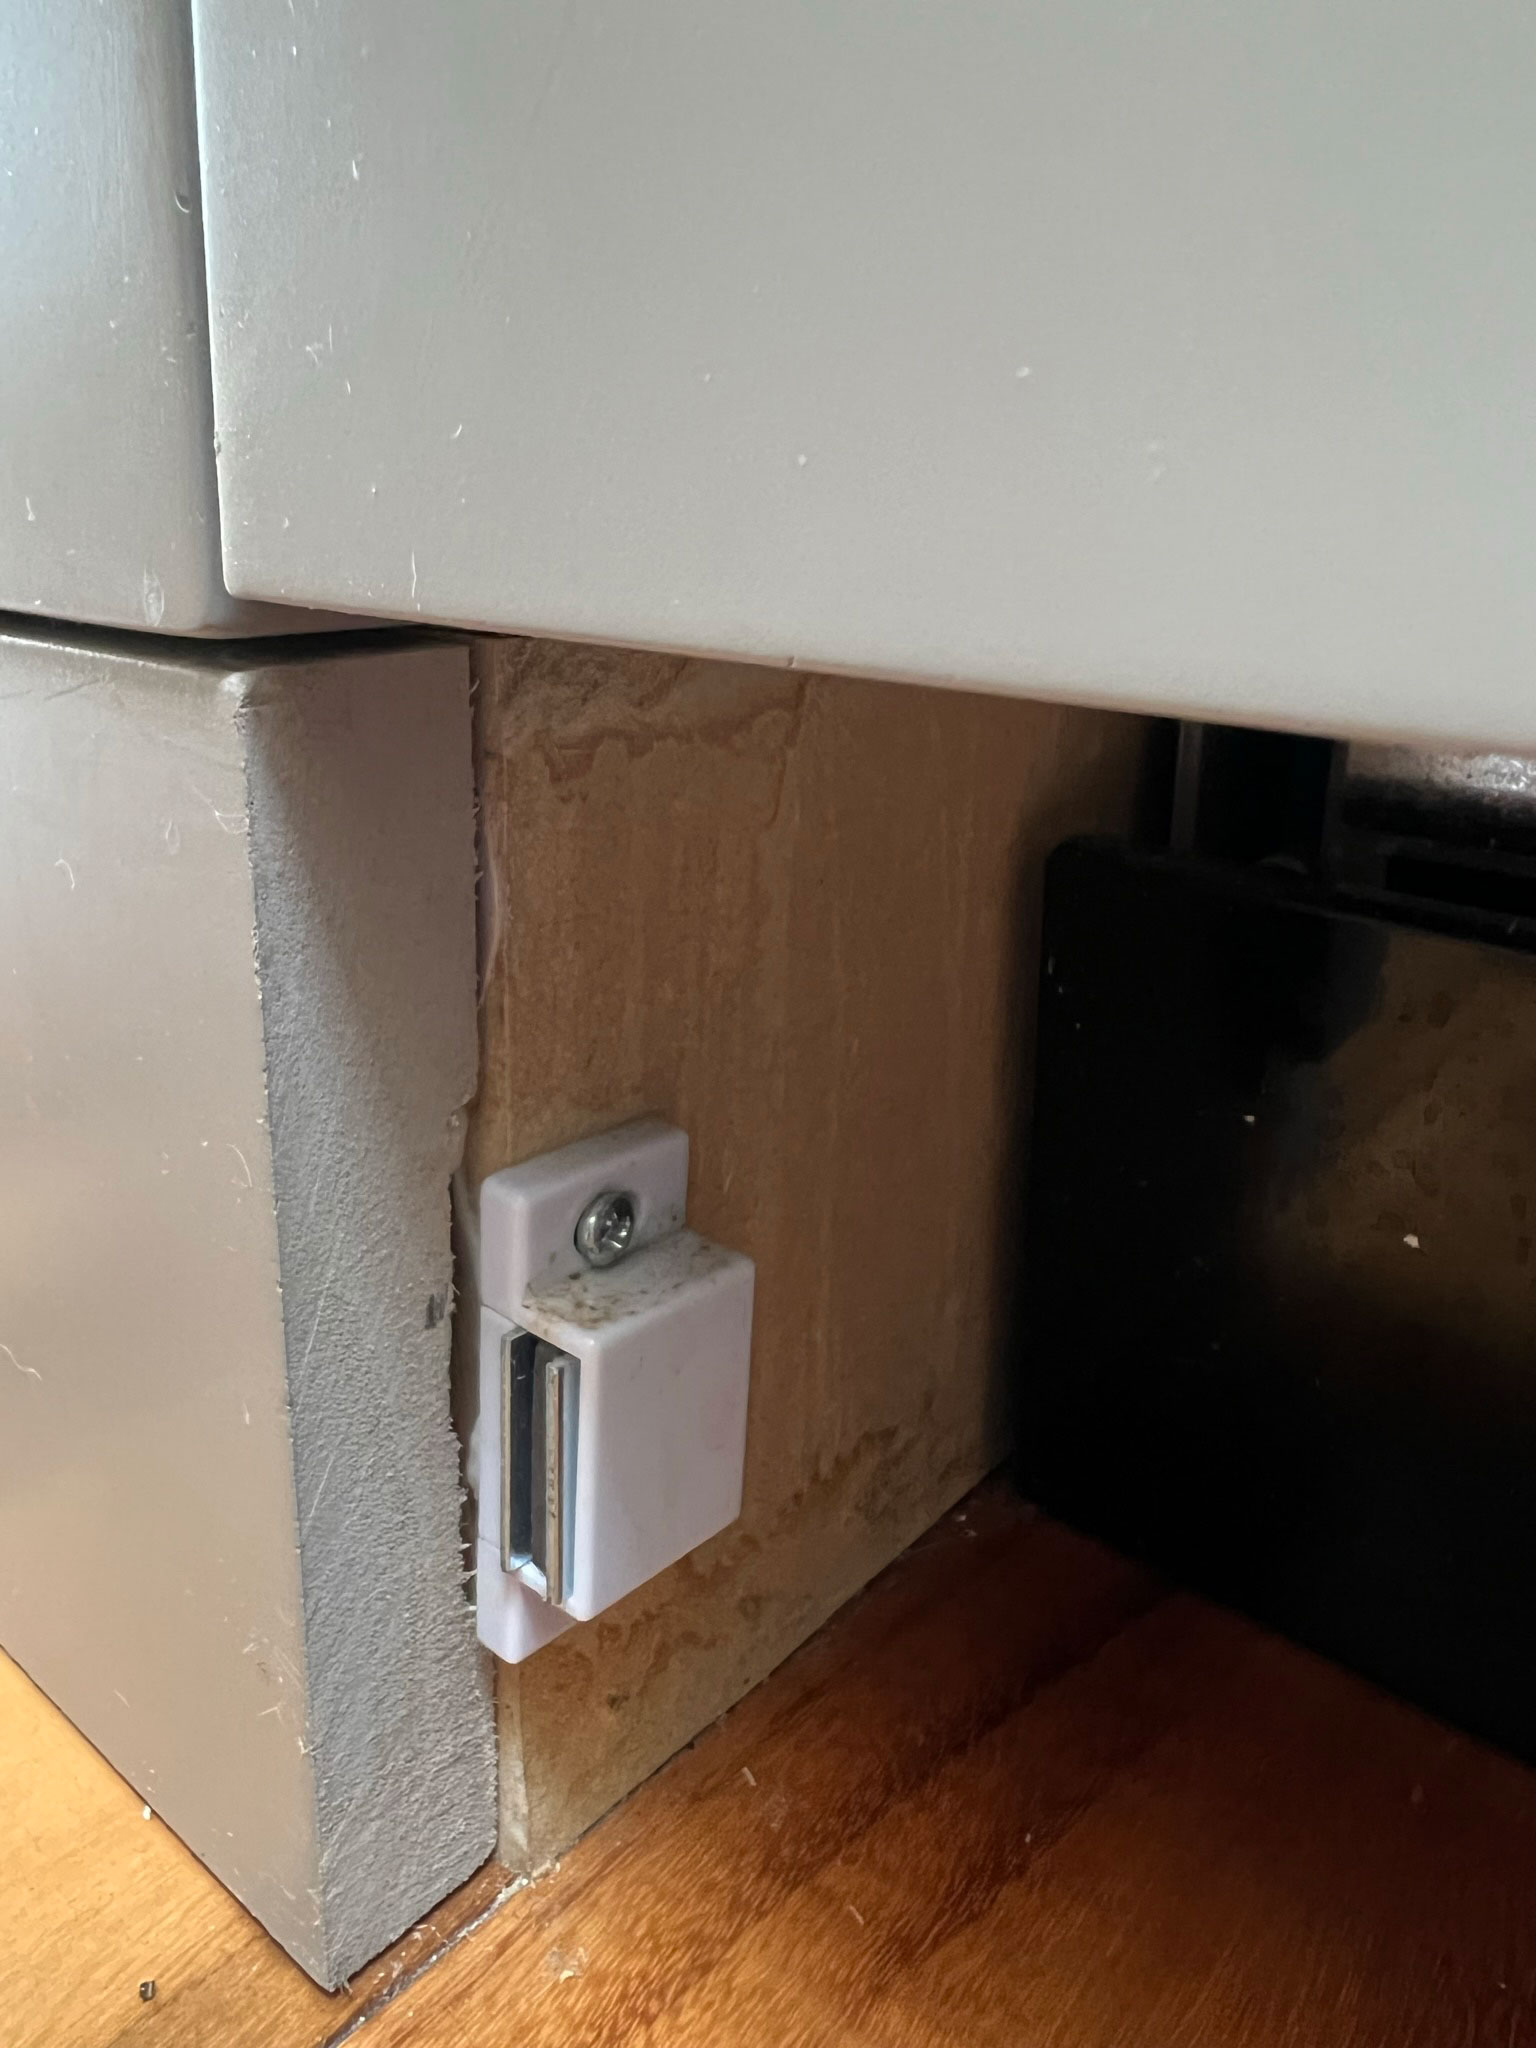 magnetic clasp inside the toe kick area under a dishwasher